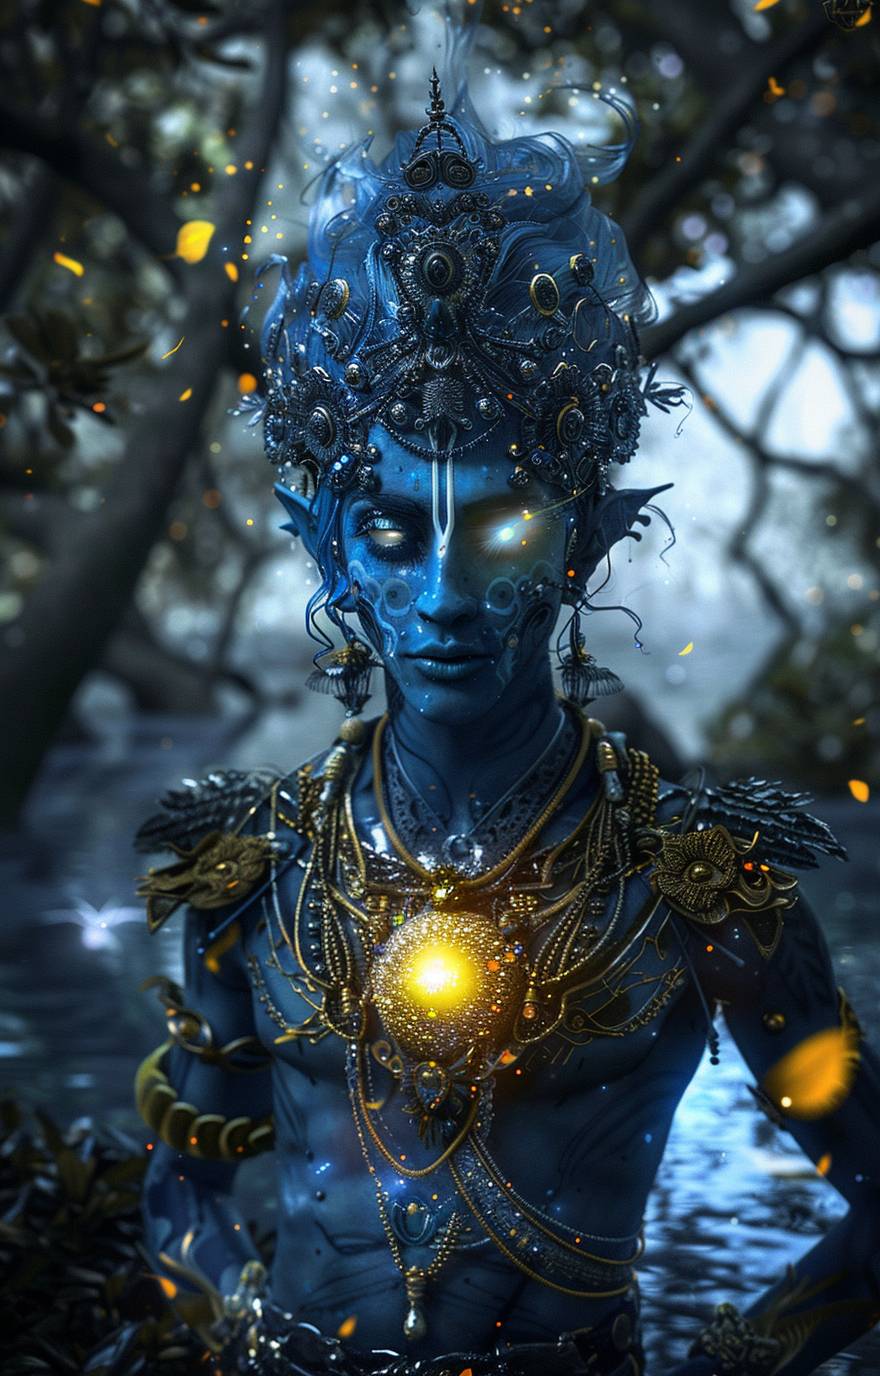 A blue-skinned humanoid with an elegant headpiece resembling the universe, glowing eyes and a yellow aura emanating from their chest, adorned in intricate silver jewelry and surrounded by trees. The background is dark with light reflections on water, creating a mystical atmosphere.